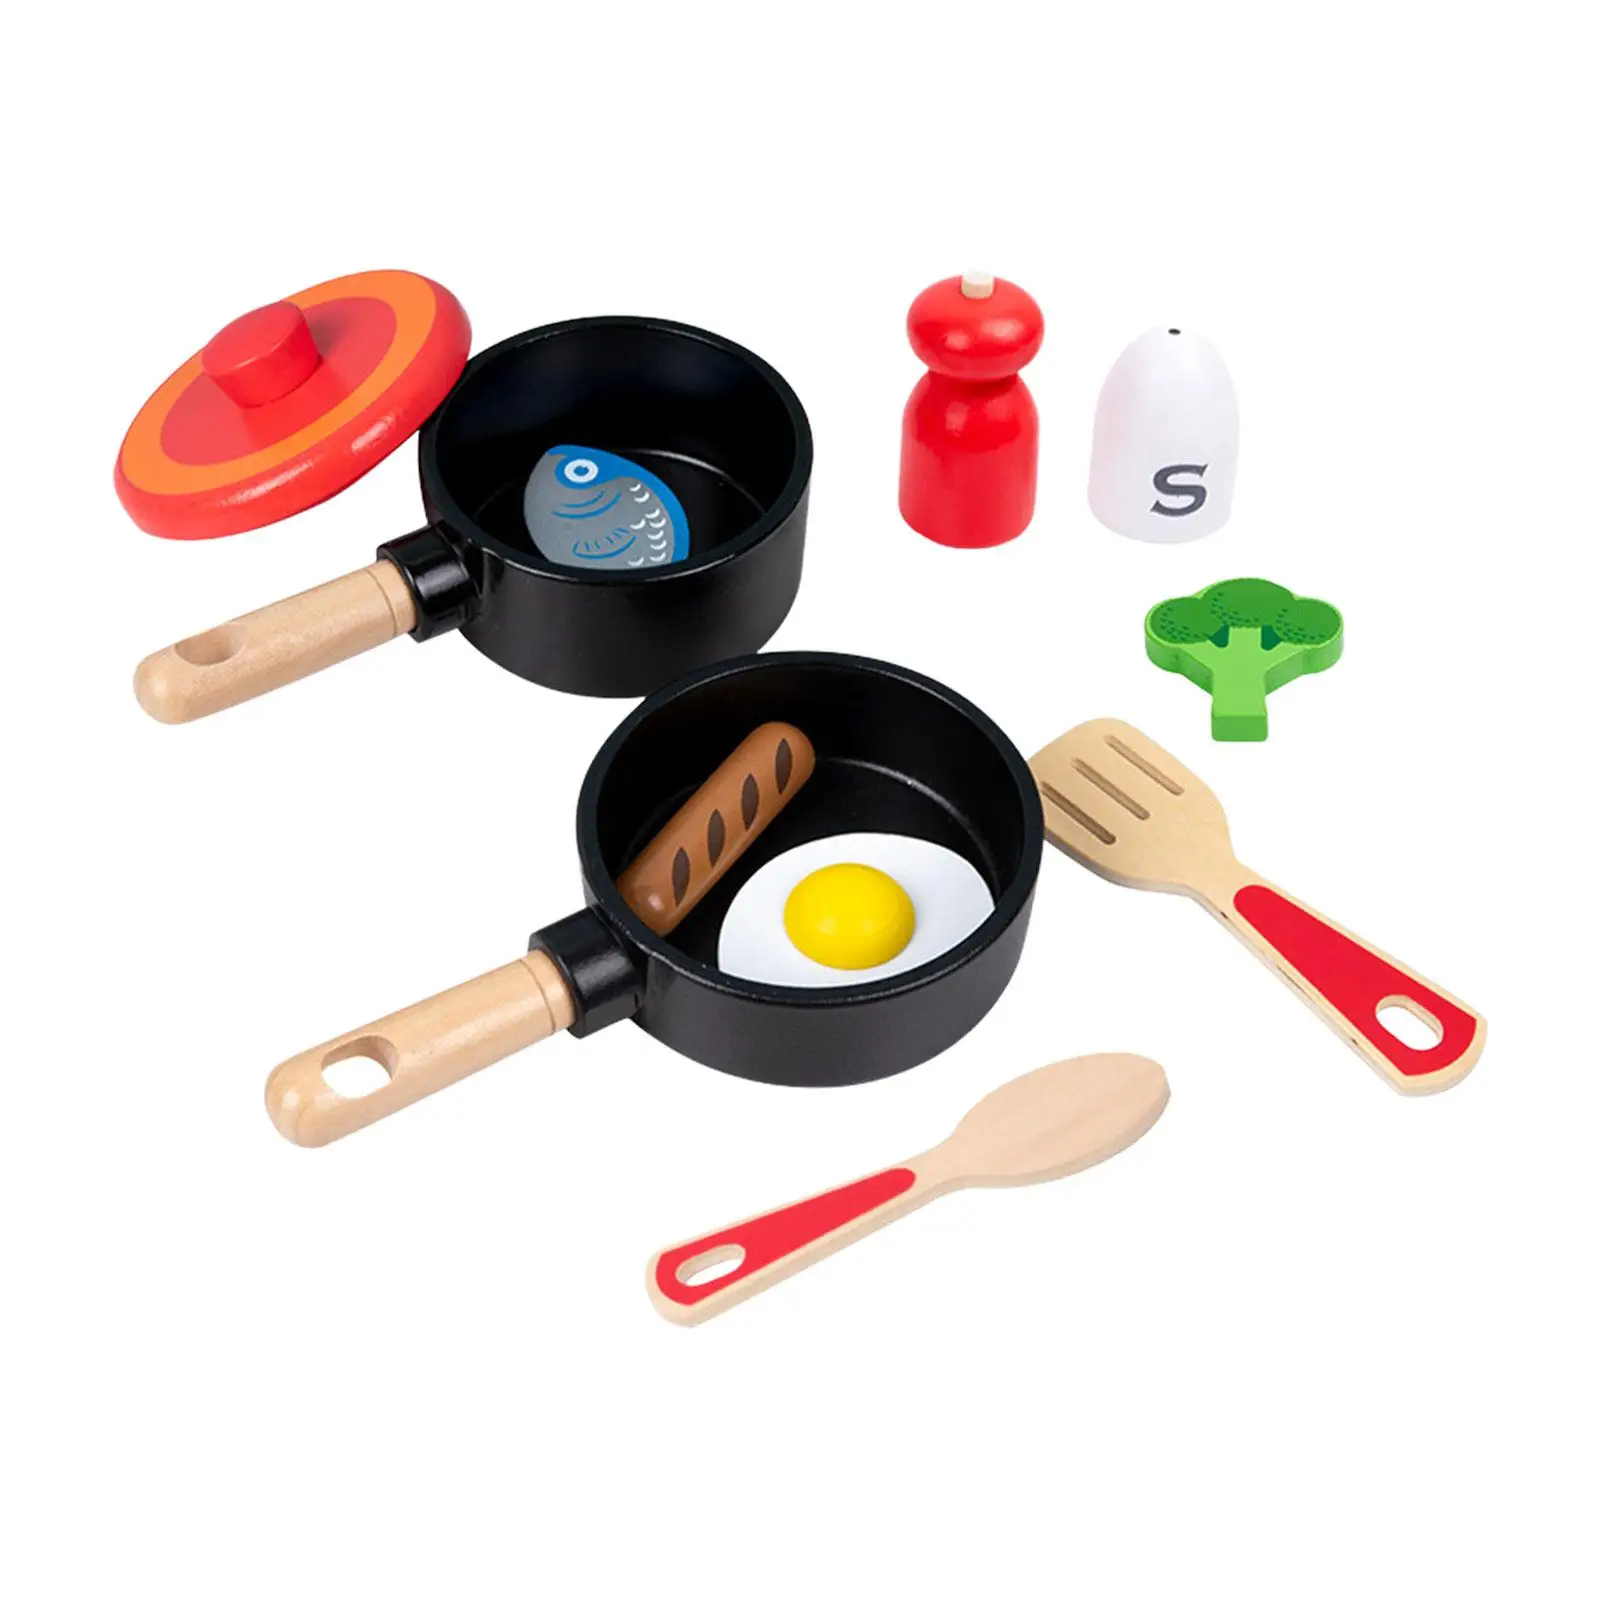 11 Pieces Pretend Cooking Accessories Cookware Pots and Pans Set for Boys